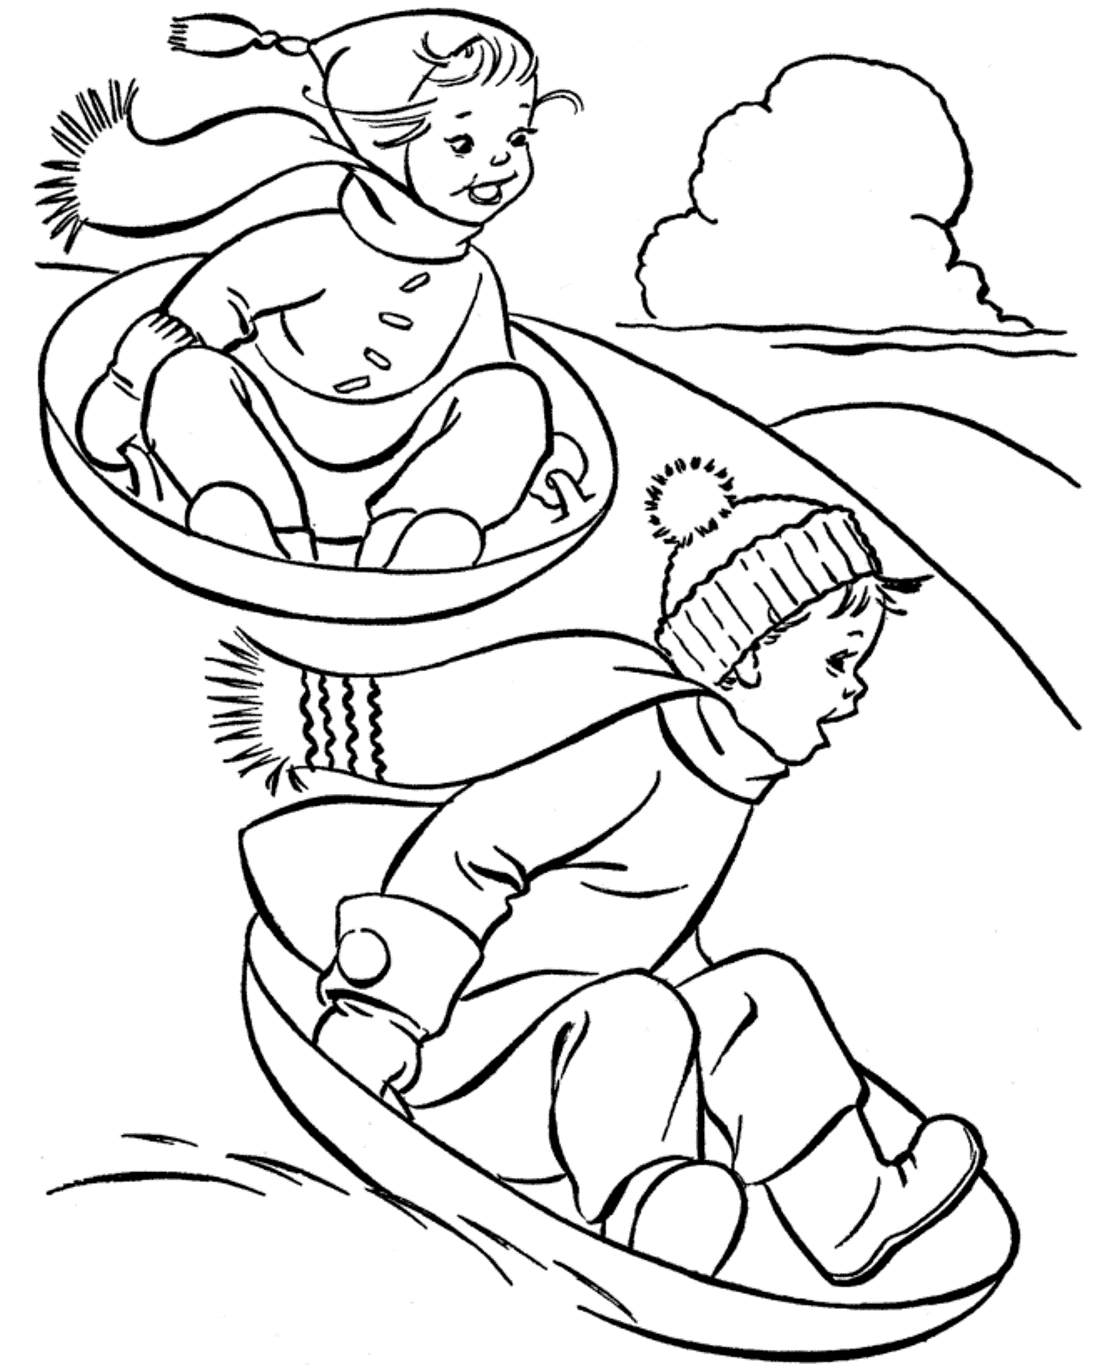 Coloring page: Winter season (Nature) #164419 - Free Printable Coloring Pages